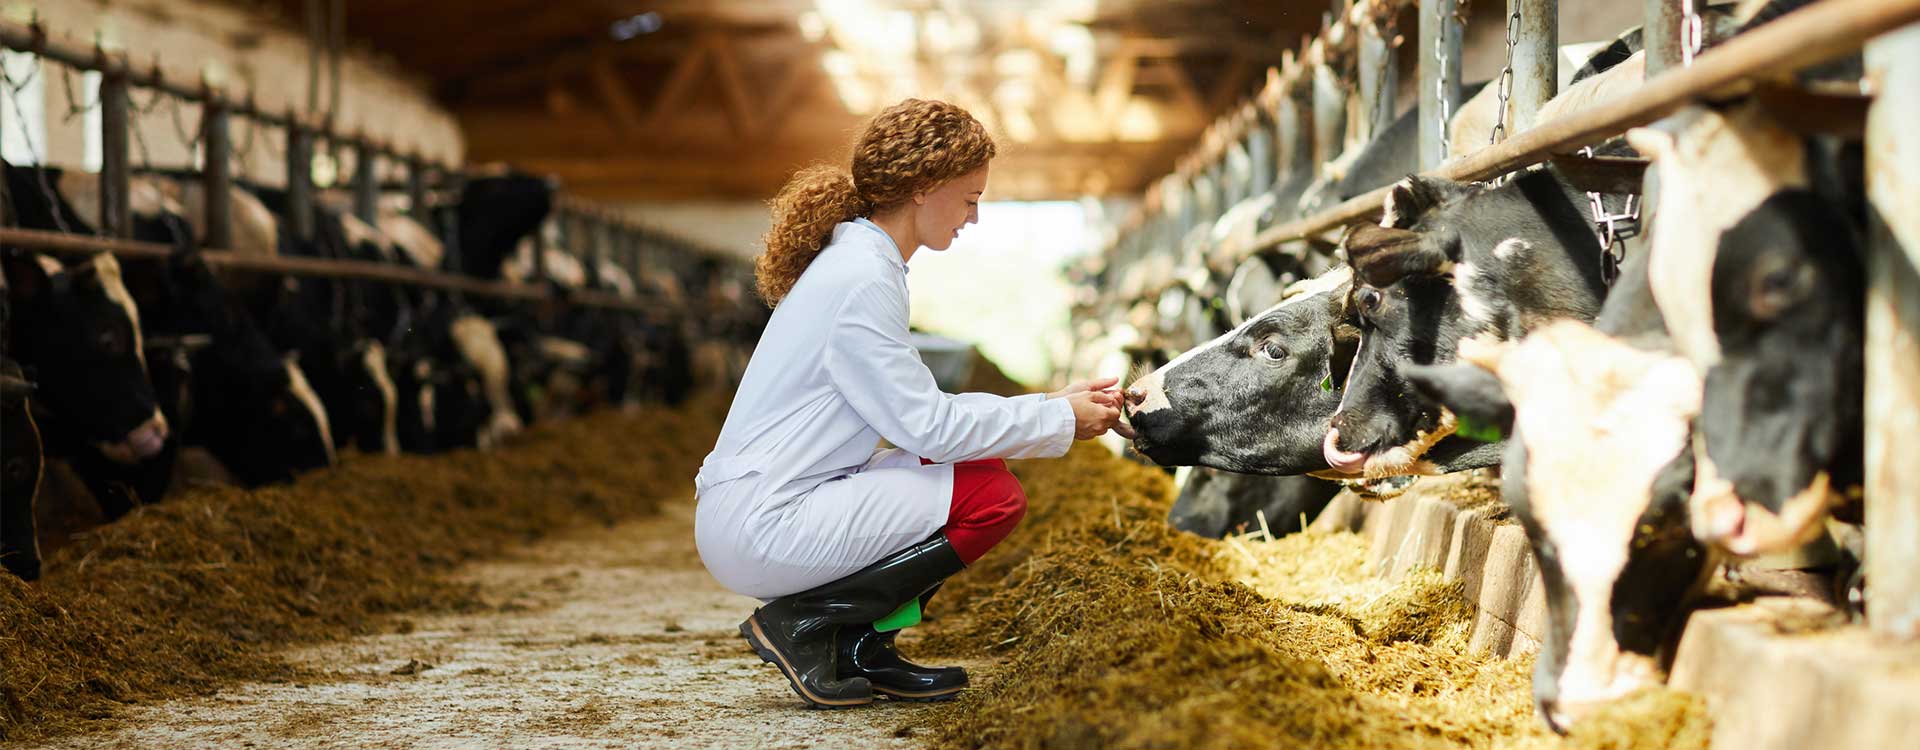 young-woman-caring-for-cows